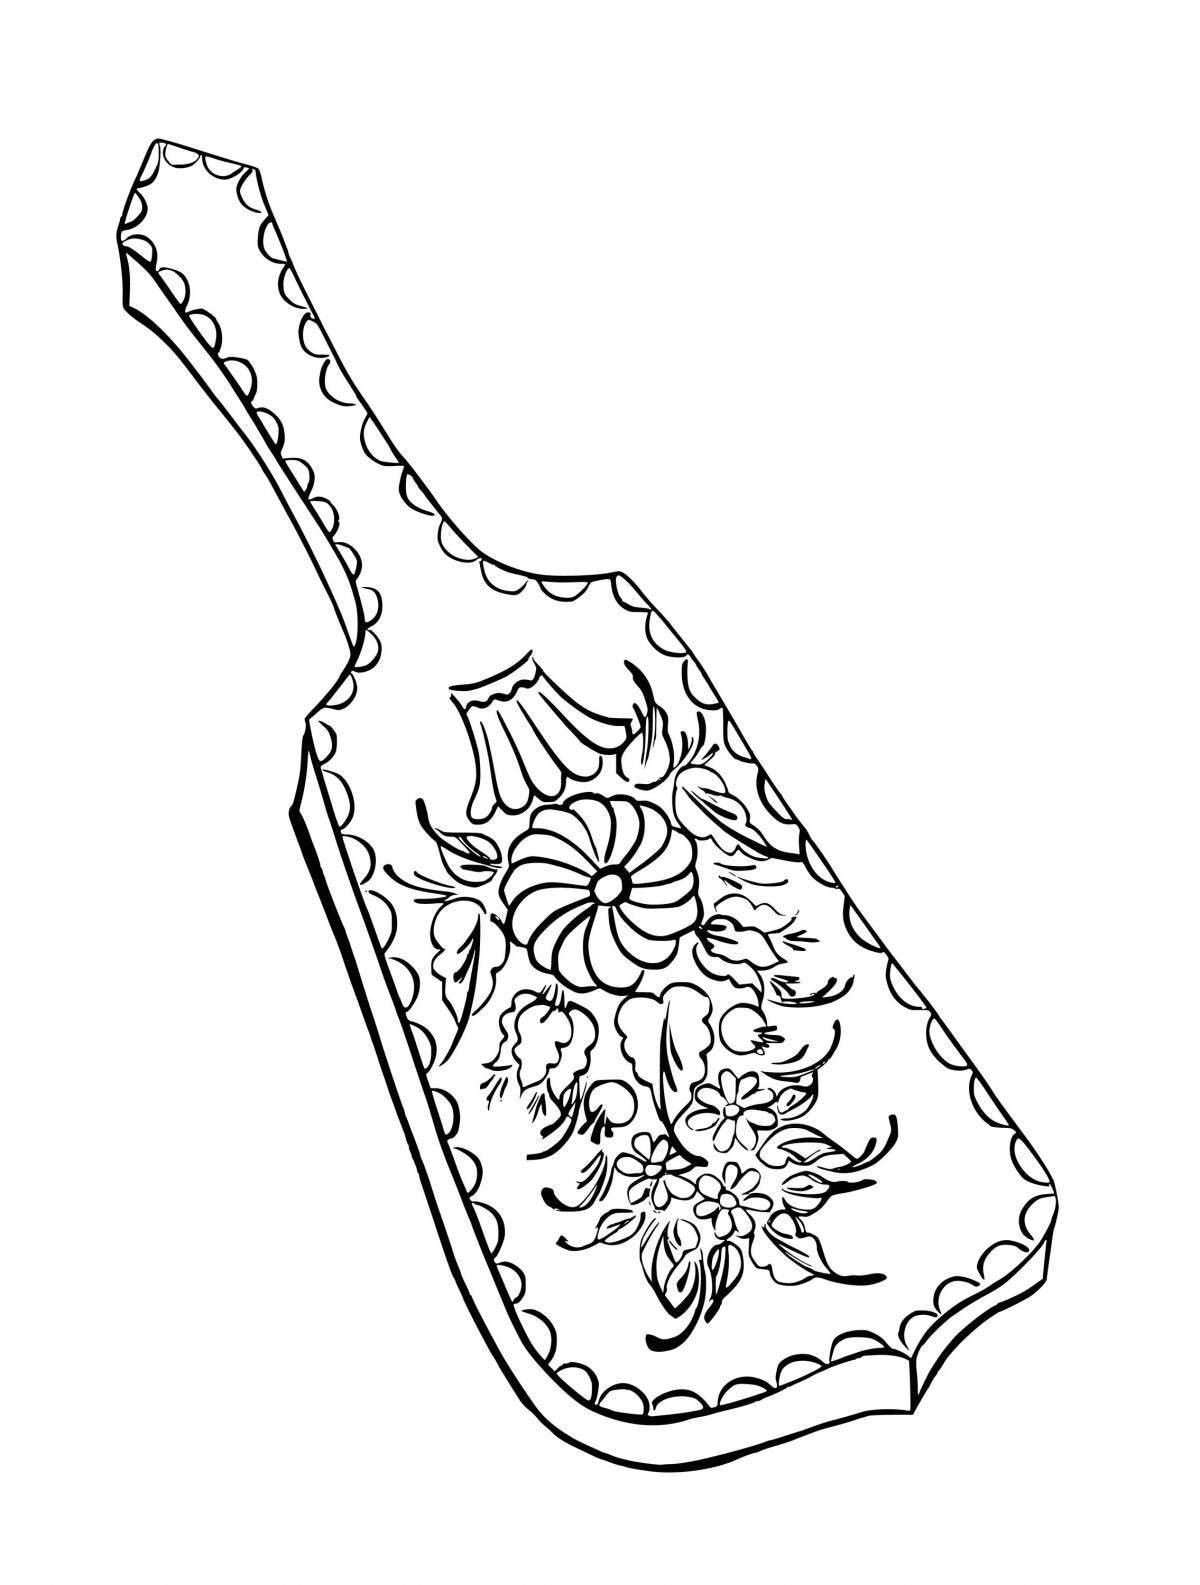 Charming spoon coloring book